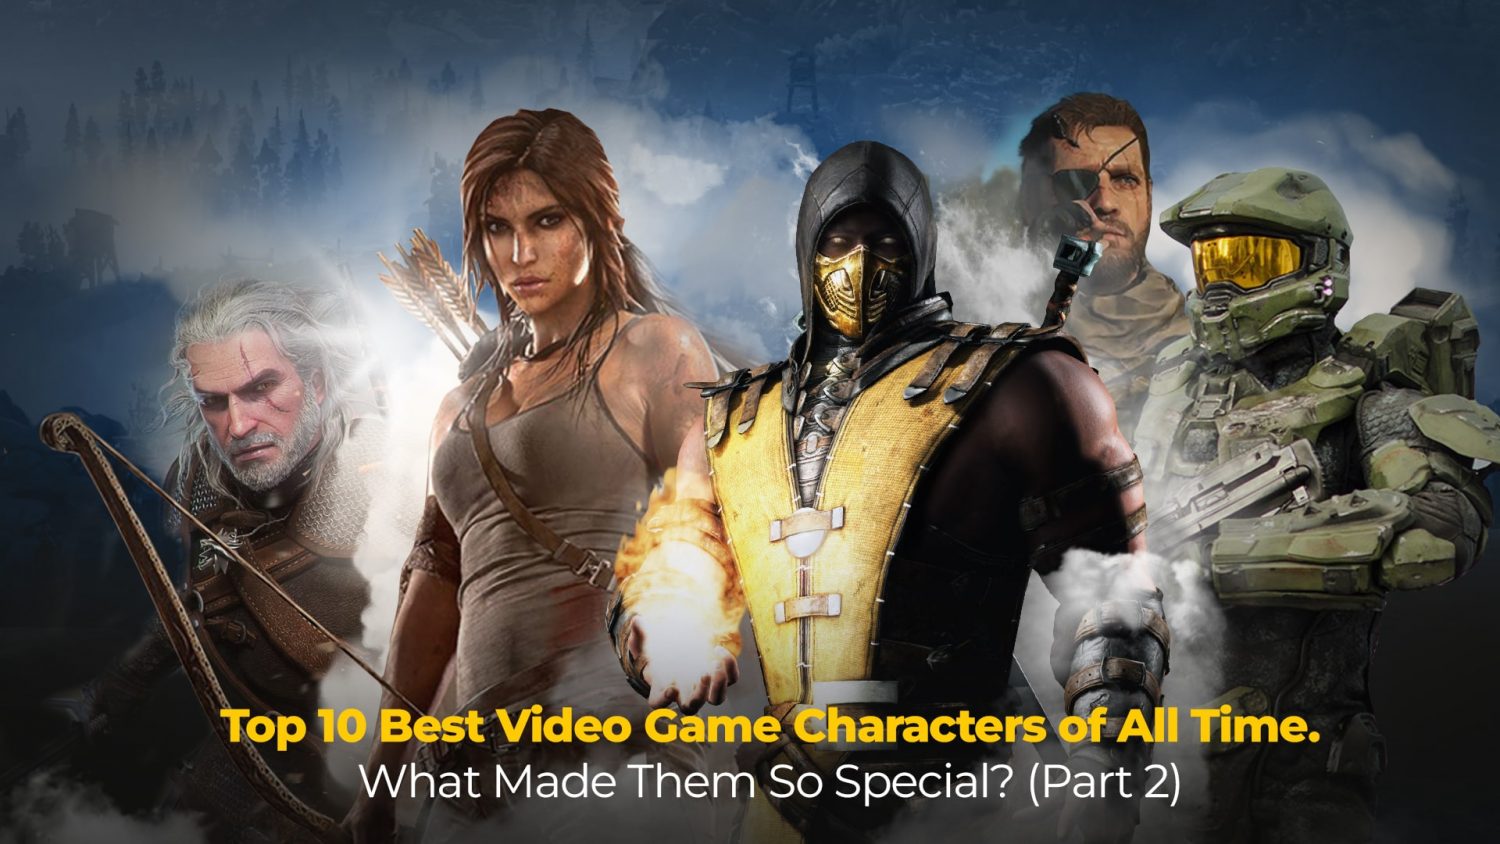 Feature image showing Geralt of Rivia, Lara Croft, Scorpion, Master Chief and Venom Snake as the best game characters